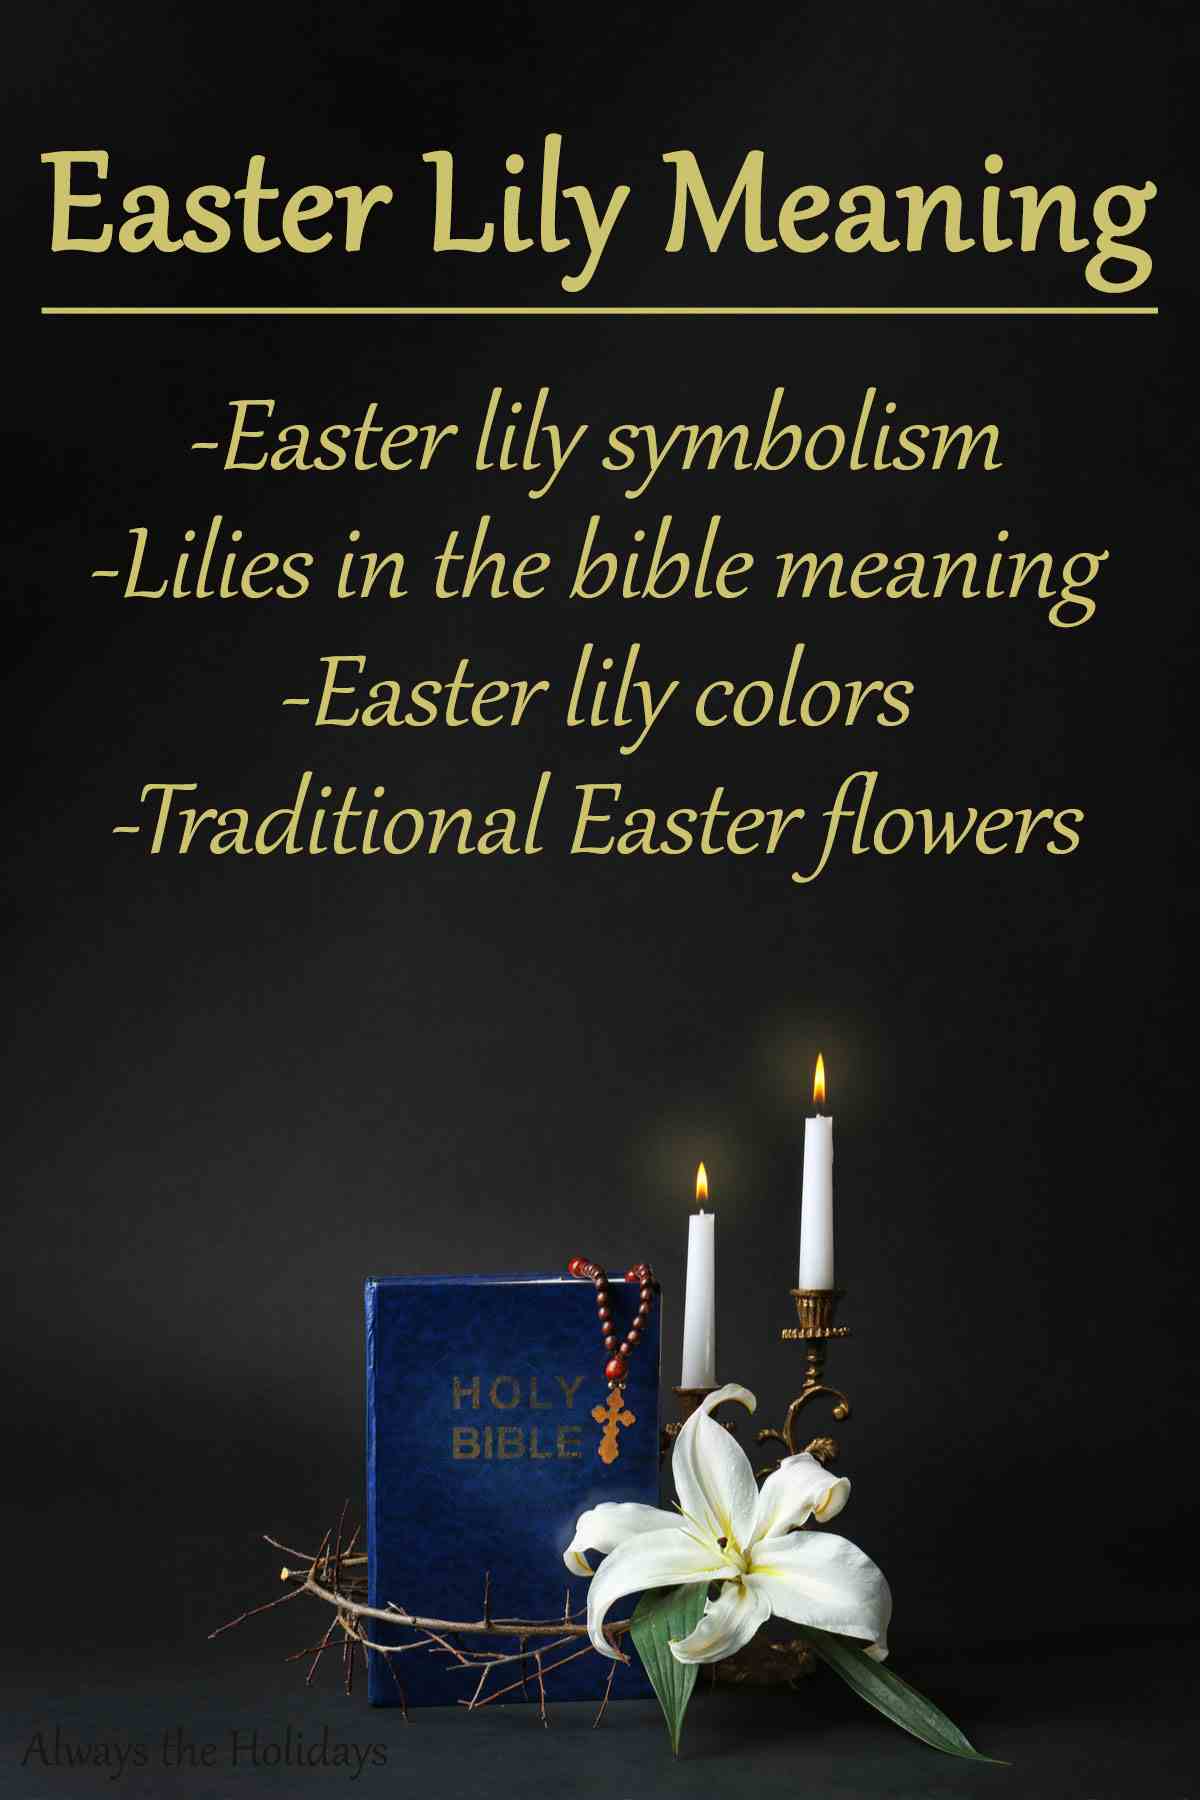 A grey background with a bible, an Easter lily, and two candles at the bottom, with a text overlay at the top which reads "Easter lily meaning - Easter lily symbolism, lilies in the bible meaning, Easter lily colors, traditional Easter flowers".